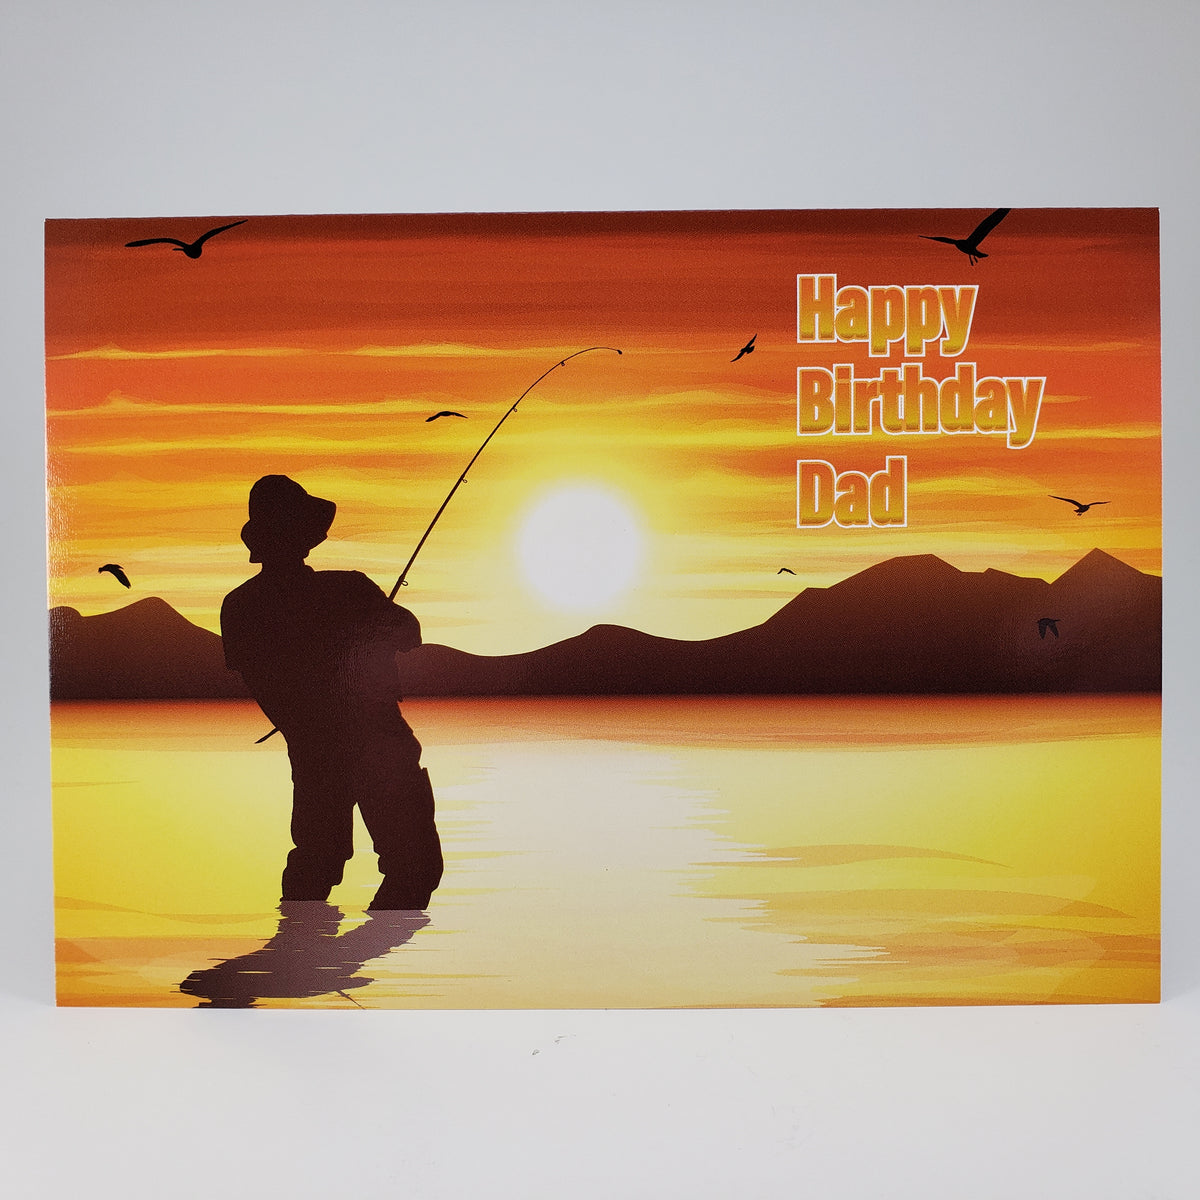 Happy Birthday Fisherman Photos and Images